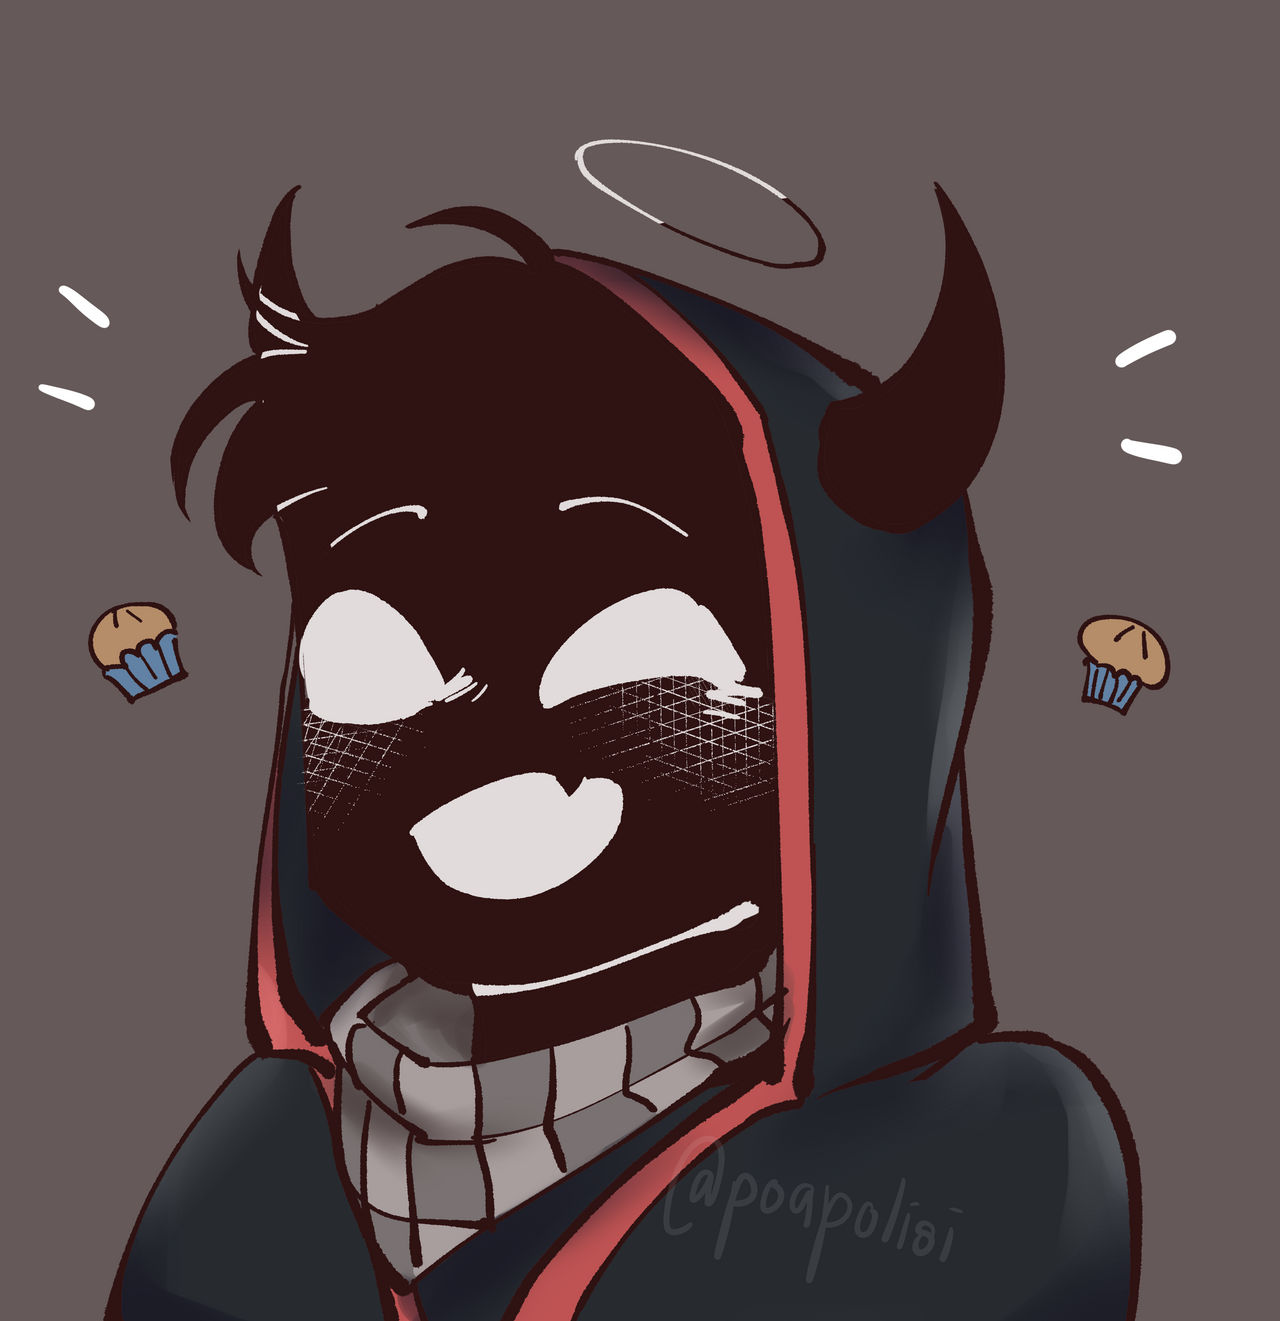 This is a drawing of Bad from the shoulders up. His skin is black and blends in with his fluffy hair that sticks out from his hood. He is smiling mid-sentence it looks like. His eyes and open mouth are white, and the outline of a single fang can be seen in his mouth. White blush is on his cheeks. Two devil horns poke out from the side of his head through the black hood outlined in red. The grey checkered fabric looks to be a scarf sitting around his neck. A thin black and white halo floats above his head. Two talking lines shoot out from Bad's head on either side while a cute muffin drawing sits under the lines. The drawing has a plain grey background.